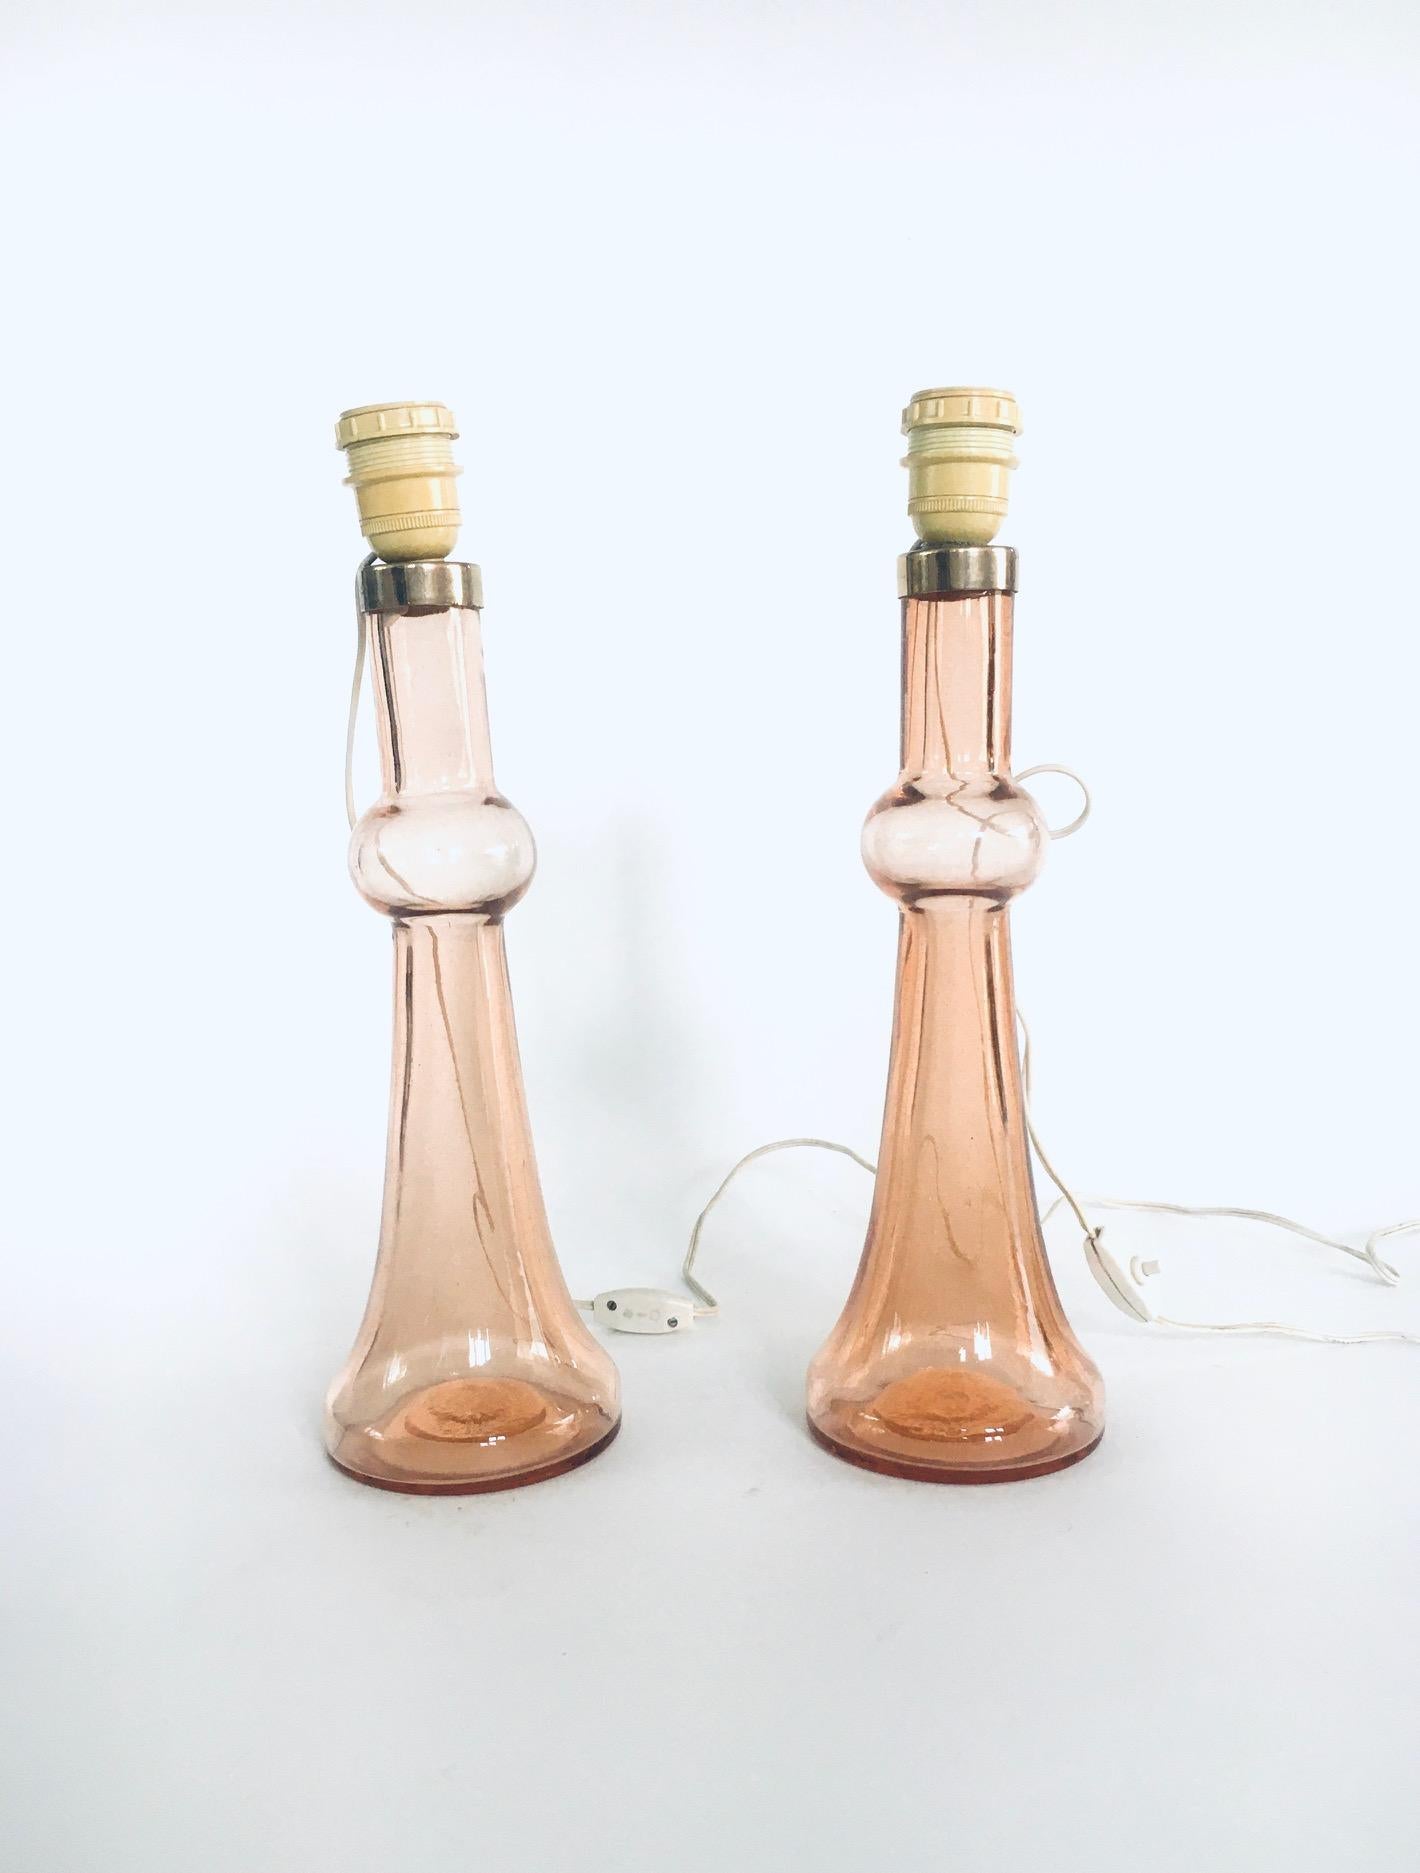 Vintage Midcentury Design Glass Table Lamp set by Nanny Still for Raak, Amsterdam, Netherlands, 1960's / 70's. Peach color glass lamp base with original fittings. Set of 2 lamps. Handmade glass, which makes them slightly different in color